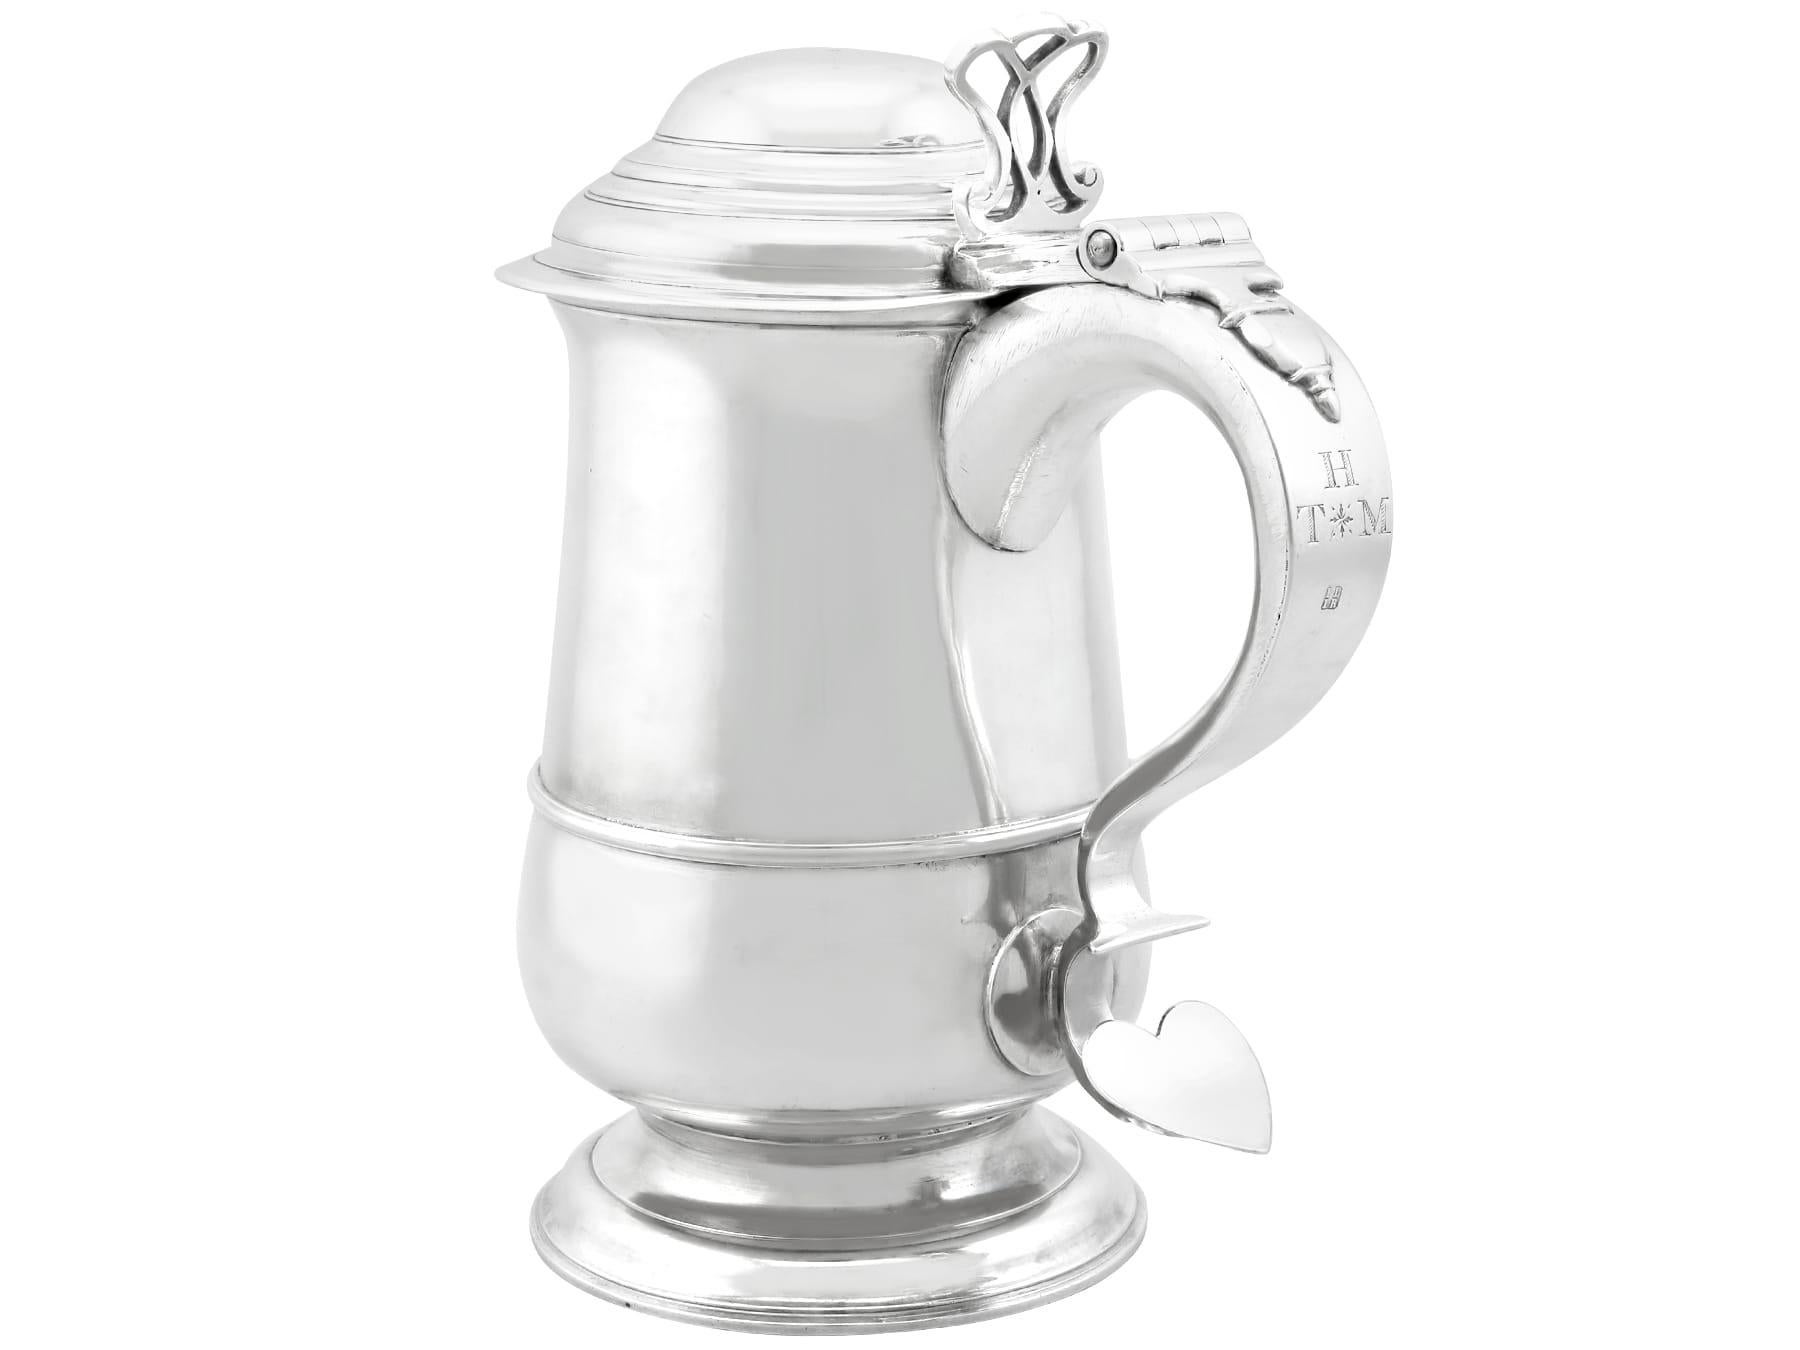 Newcastle Sterling Silver Tankard (1783) In Excellent Condition For Sale In Jesmond, Newcastle Upon Tyne